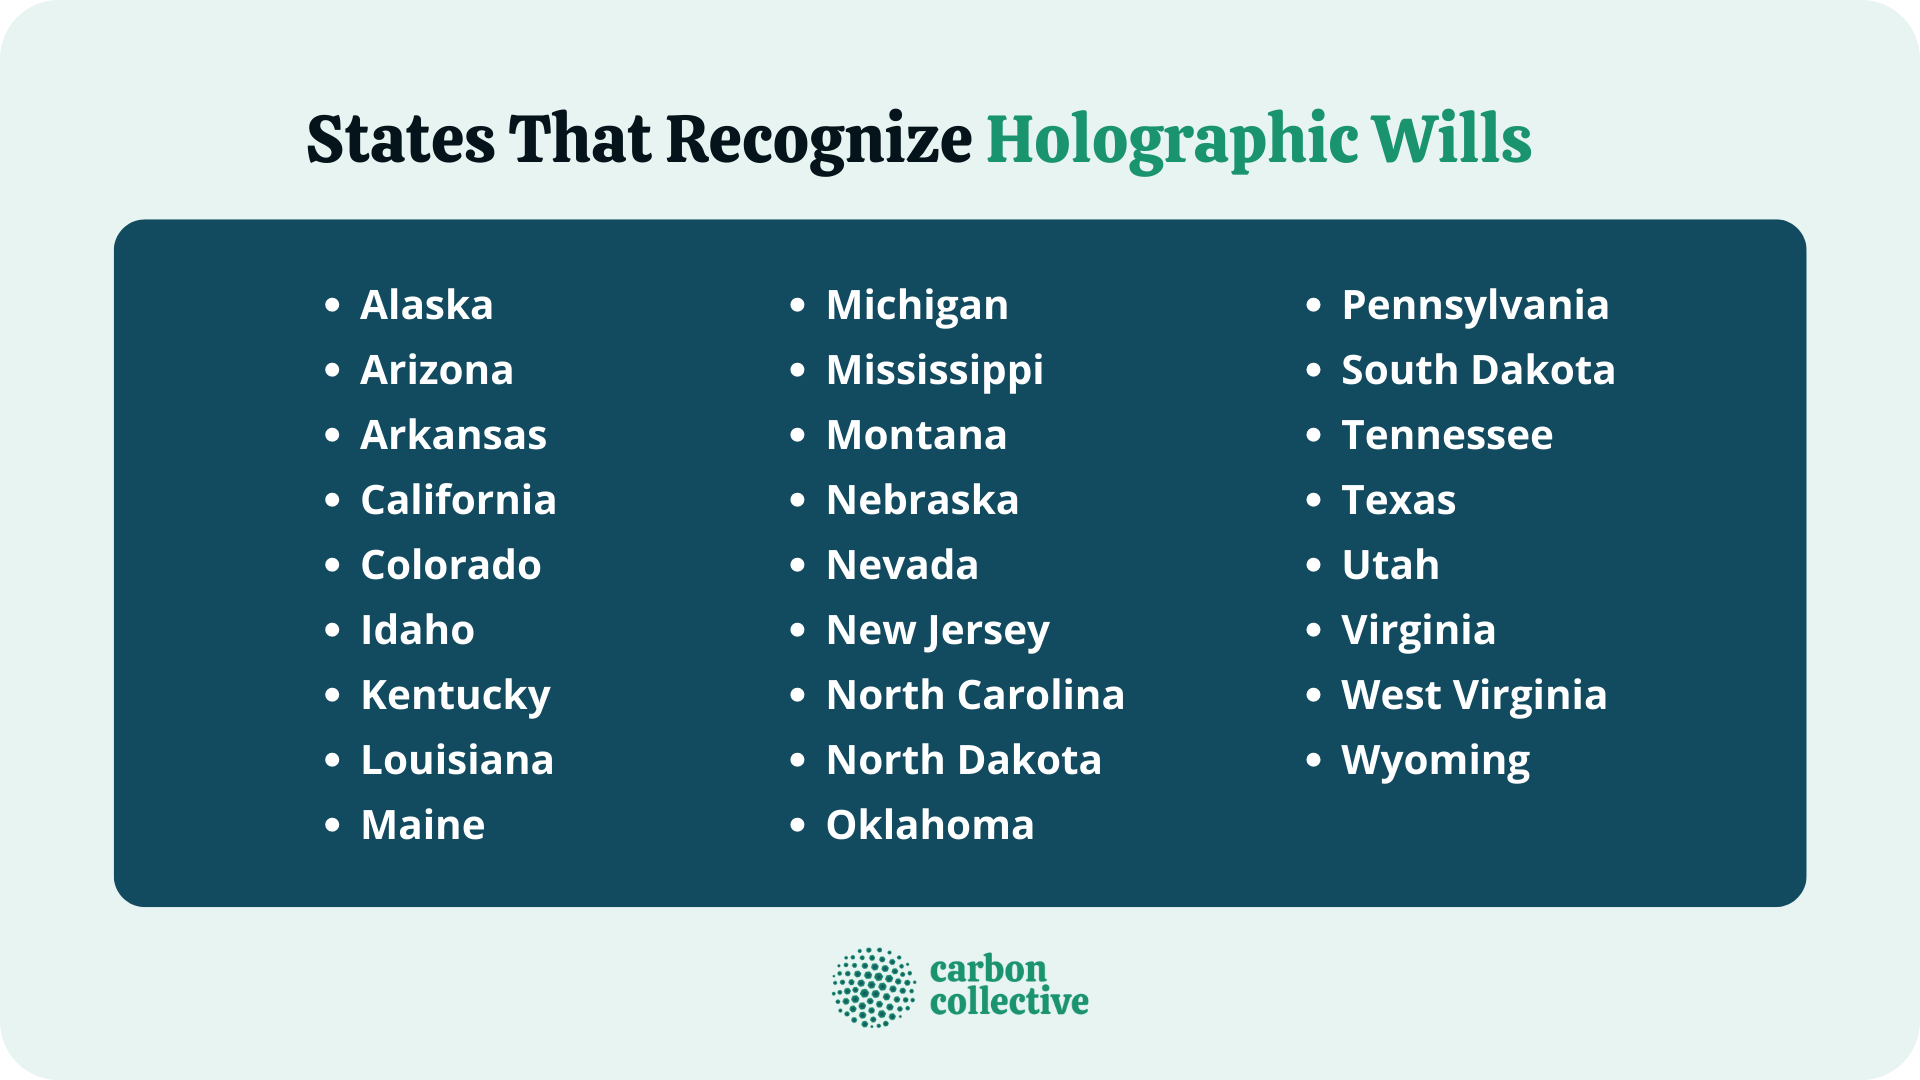 holographic-will-what-it-is-states-that-recognize-it